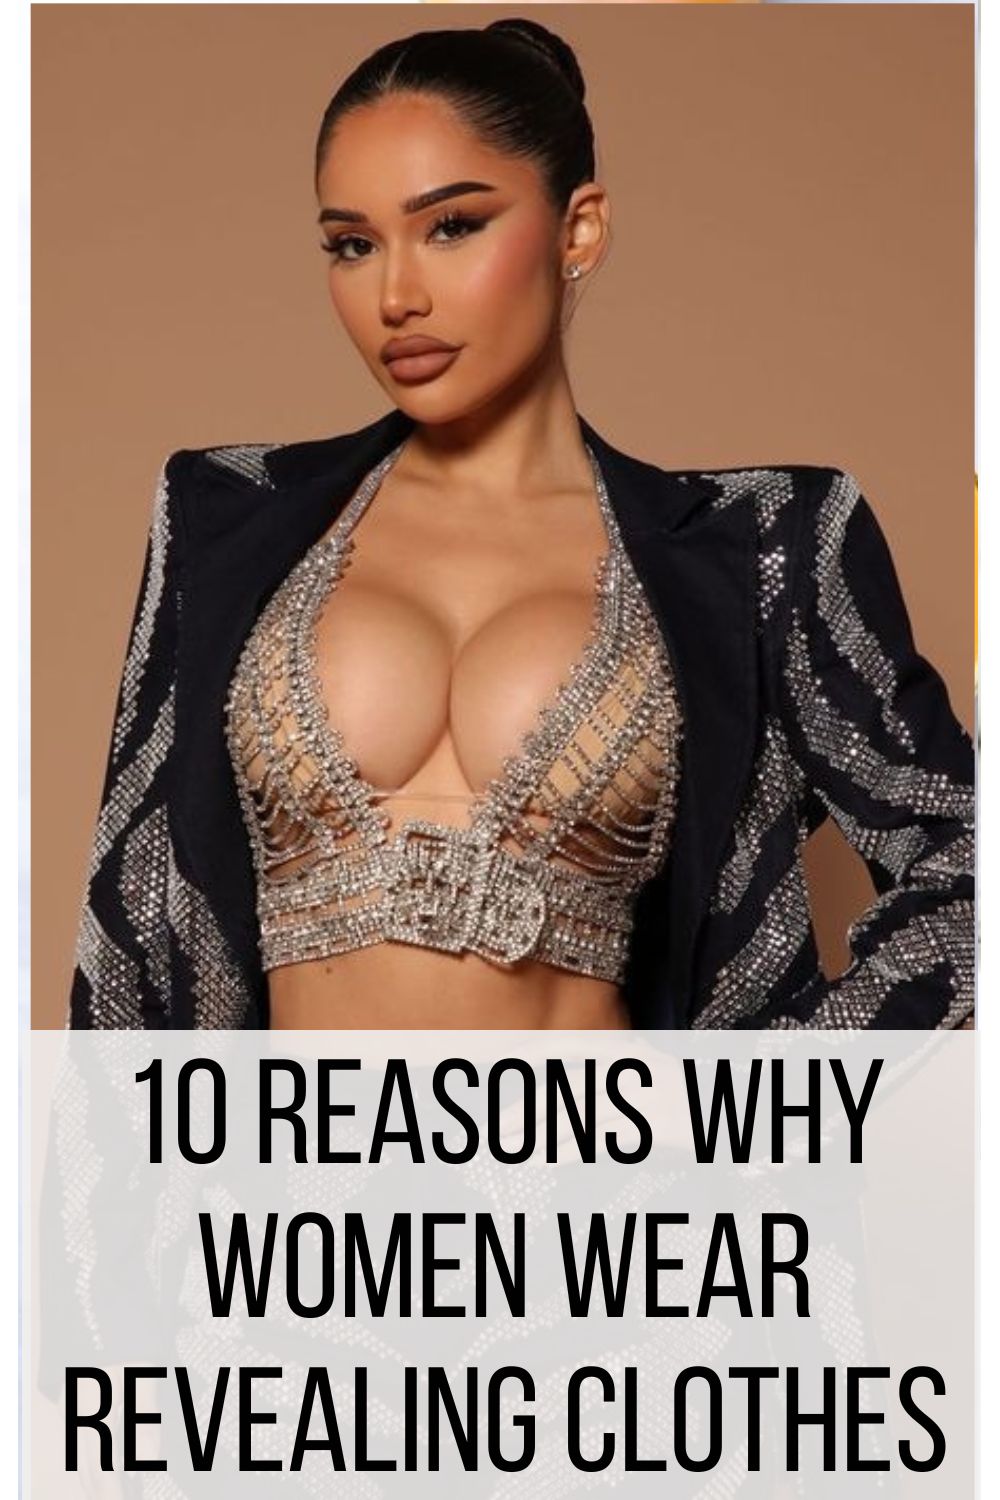 10 Reasons Why Women Wear Revealing Clothes